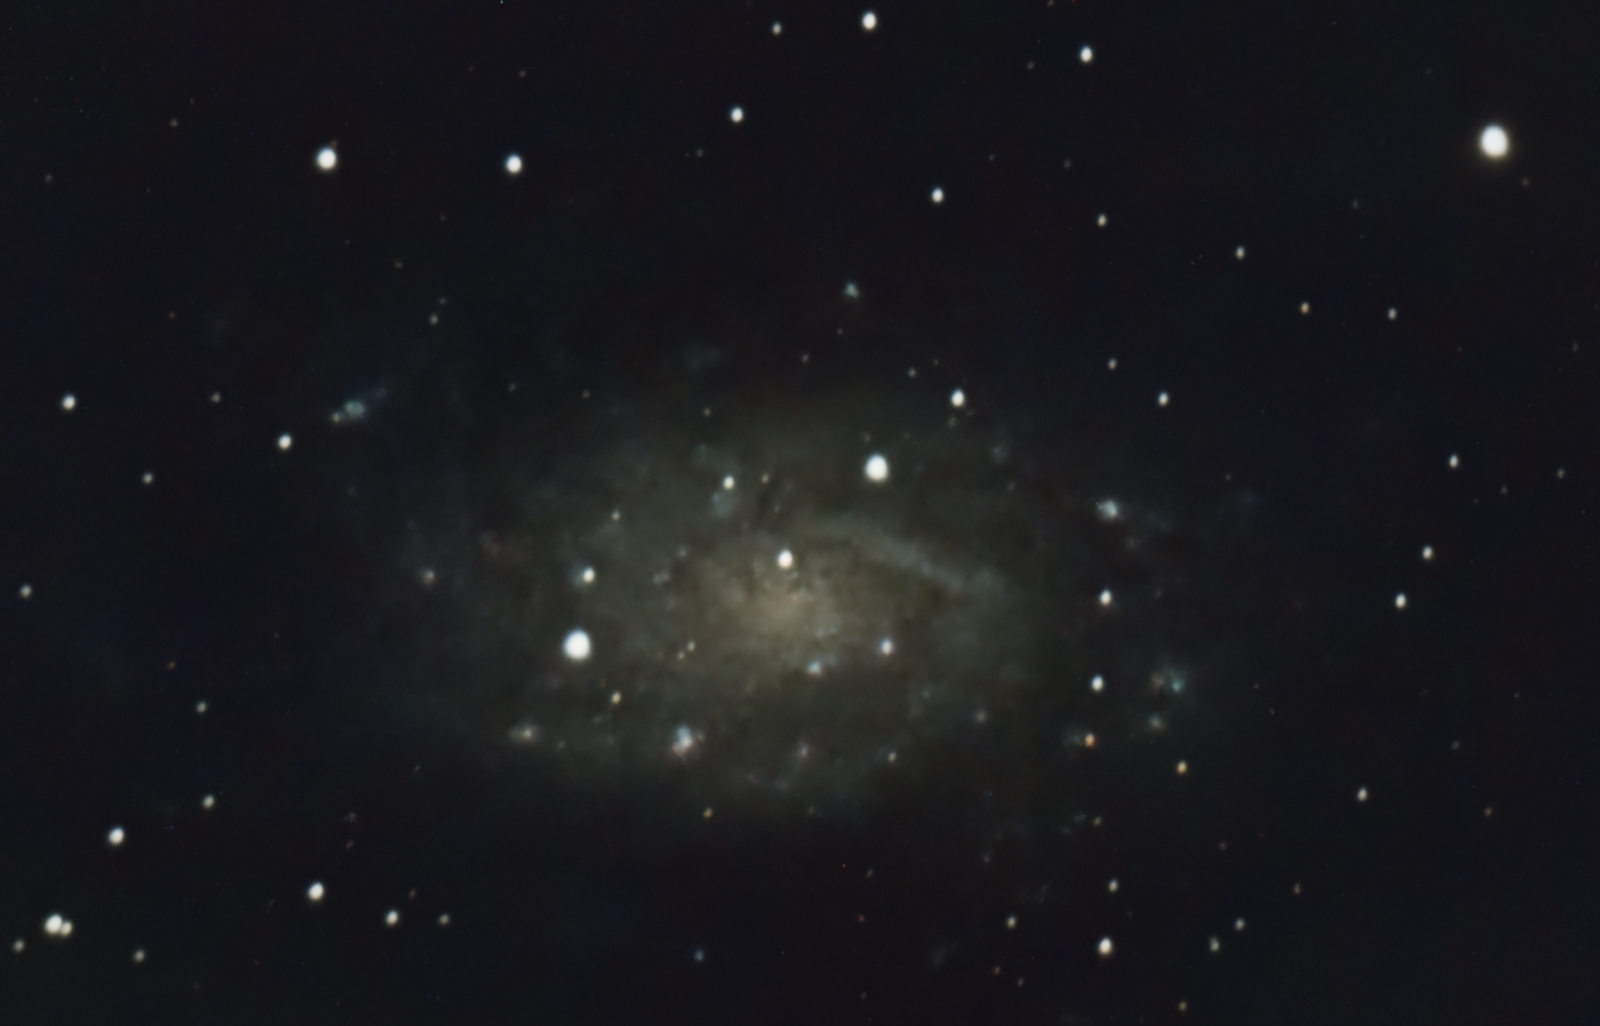 NGC2403 c11f10 2600 g350 br40 nofilter 77F 1155S APP PS23 01172023m